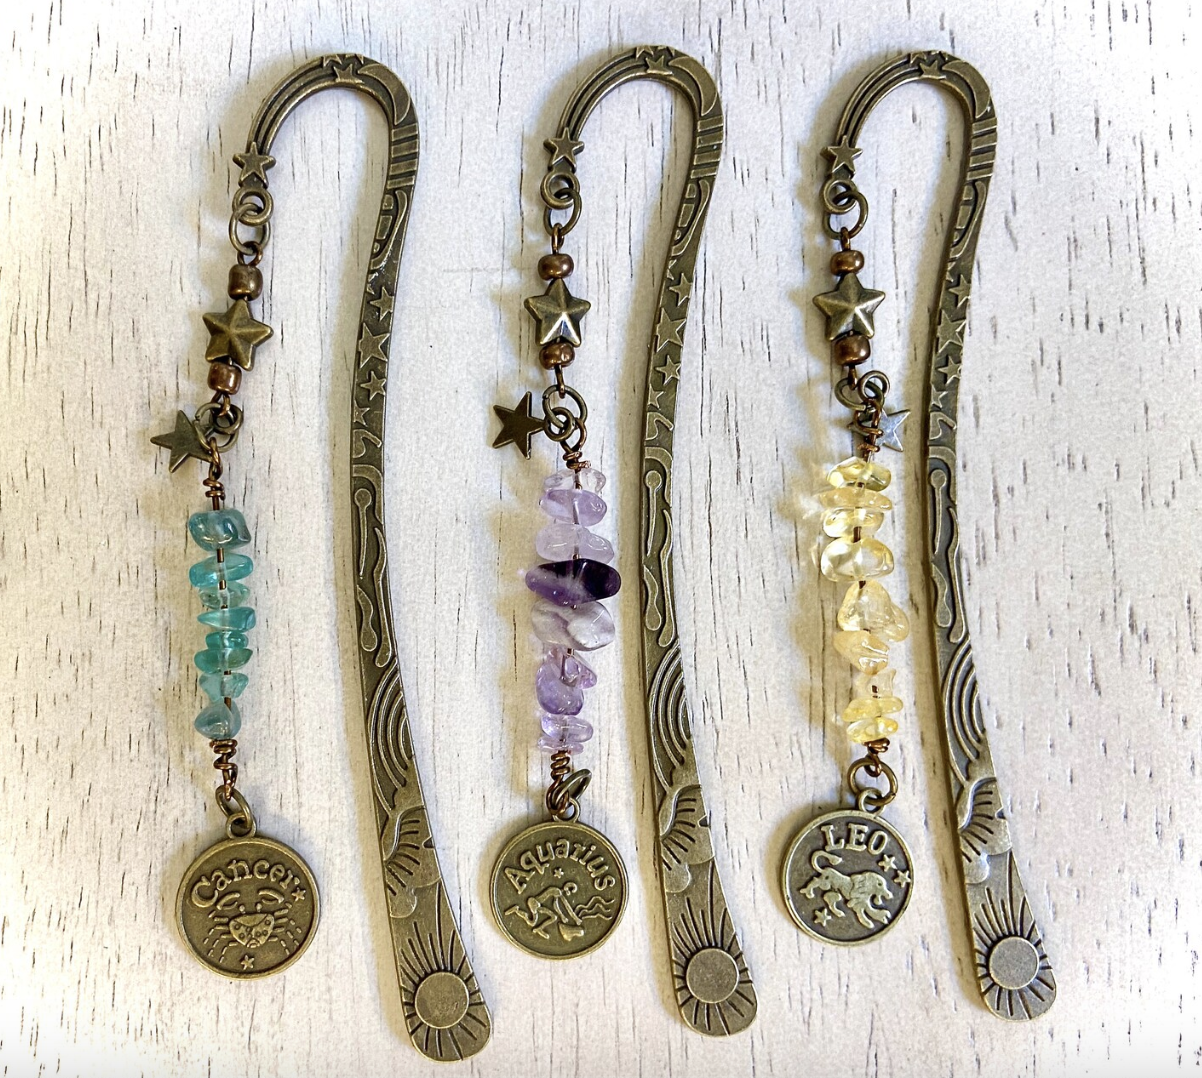 Three thin bronze bookmarks with tassels with crystal beads and a token on the end with different zodiac signs